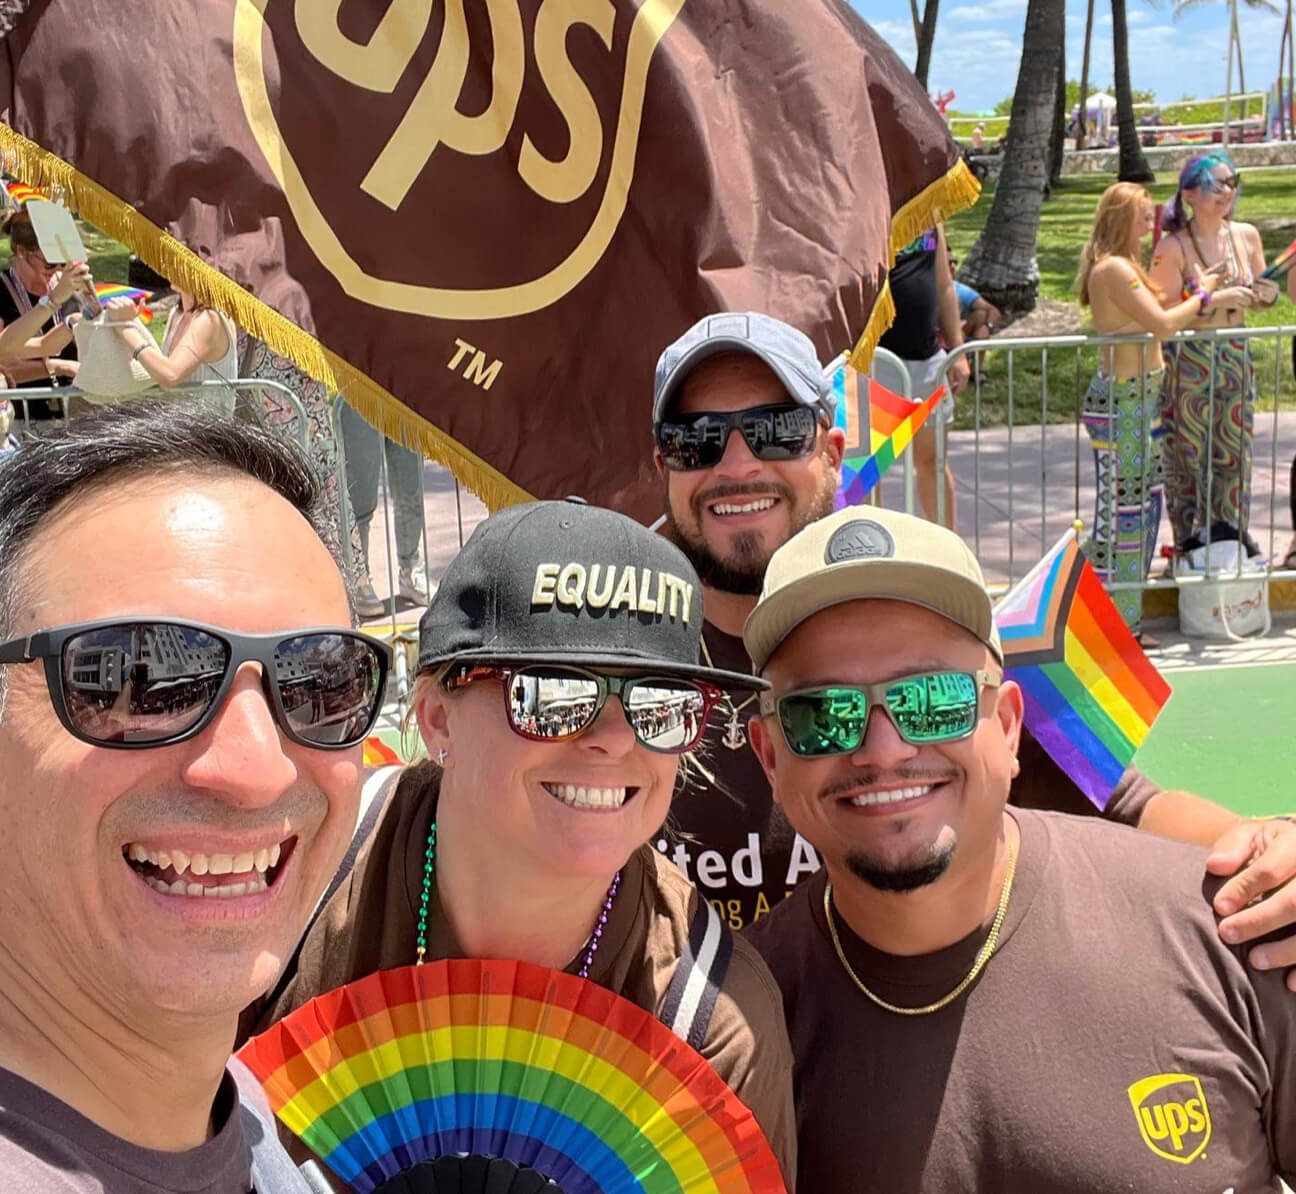 Group of people standing together and smiling in front of a UPS flag